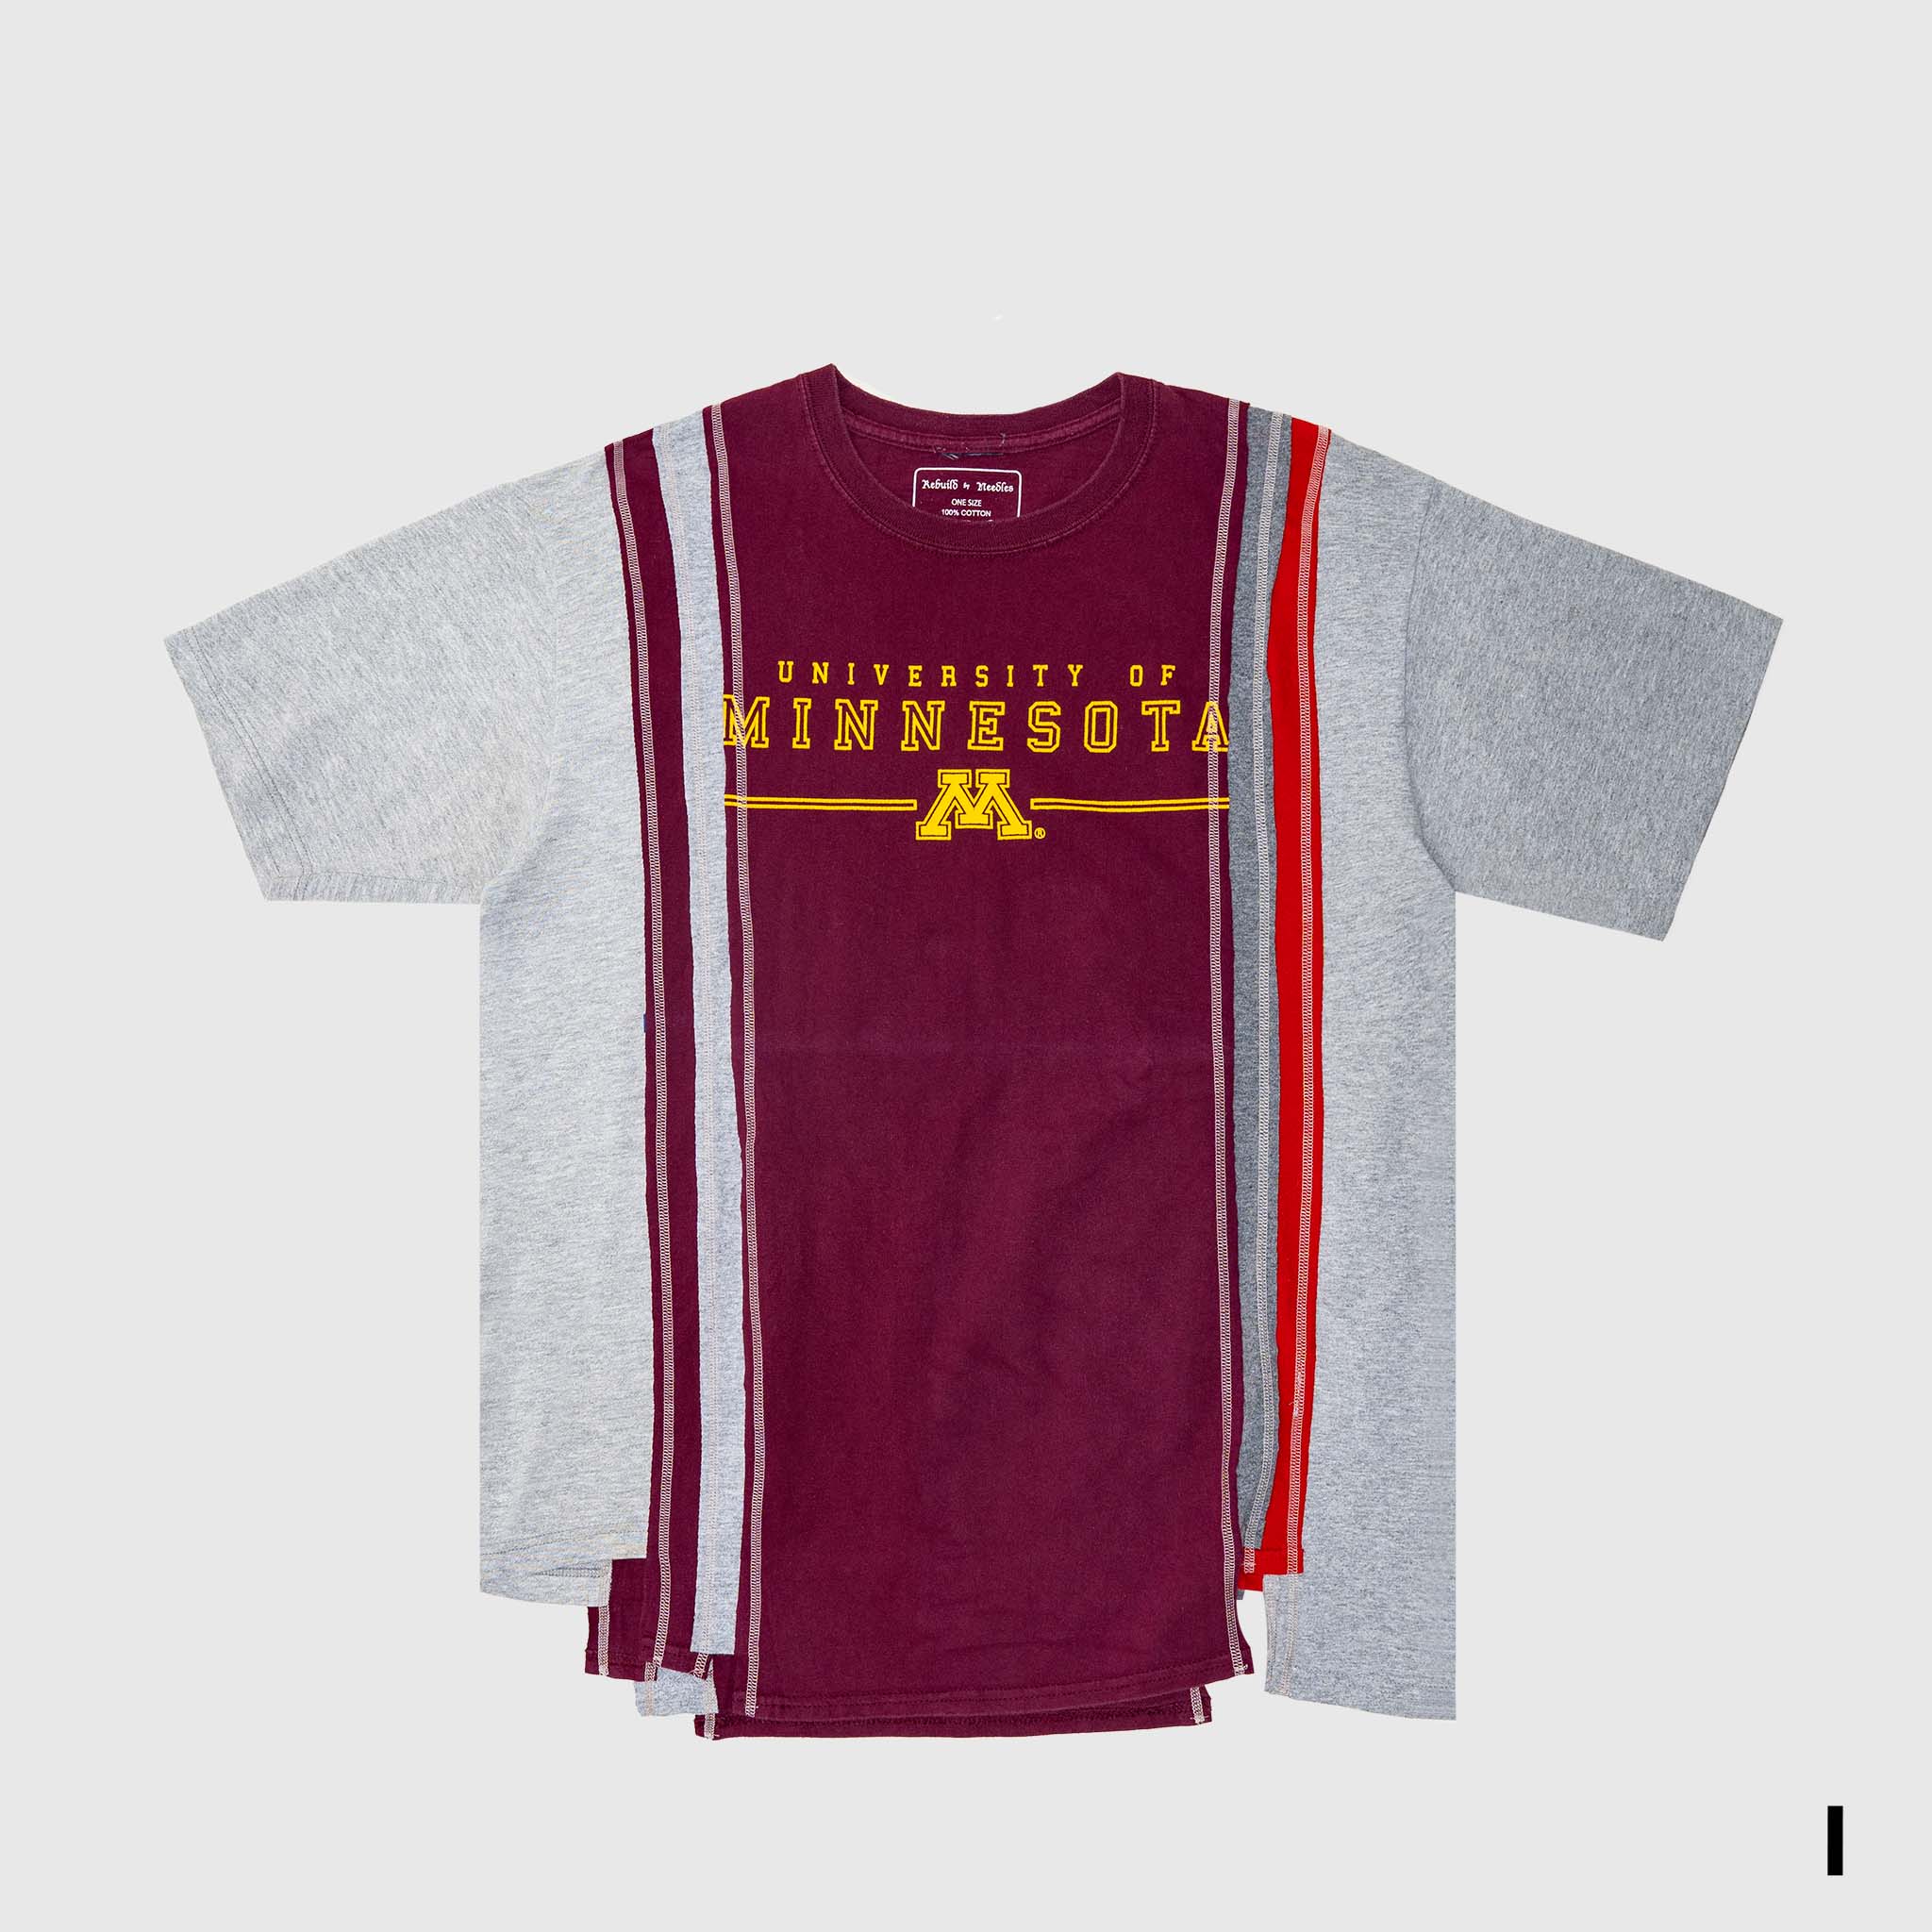 REBUILD BY NEEDLES 7 CUTS WIDE COLLEGE T-SHIRT – PACKER SHOES